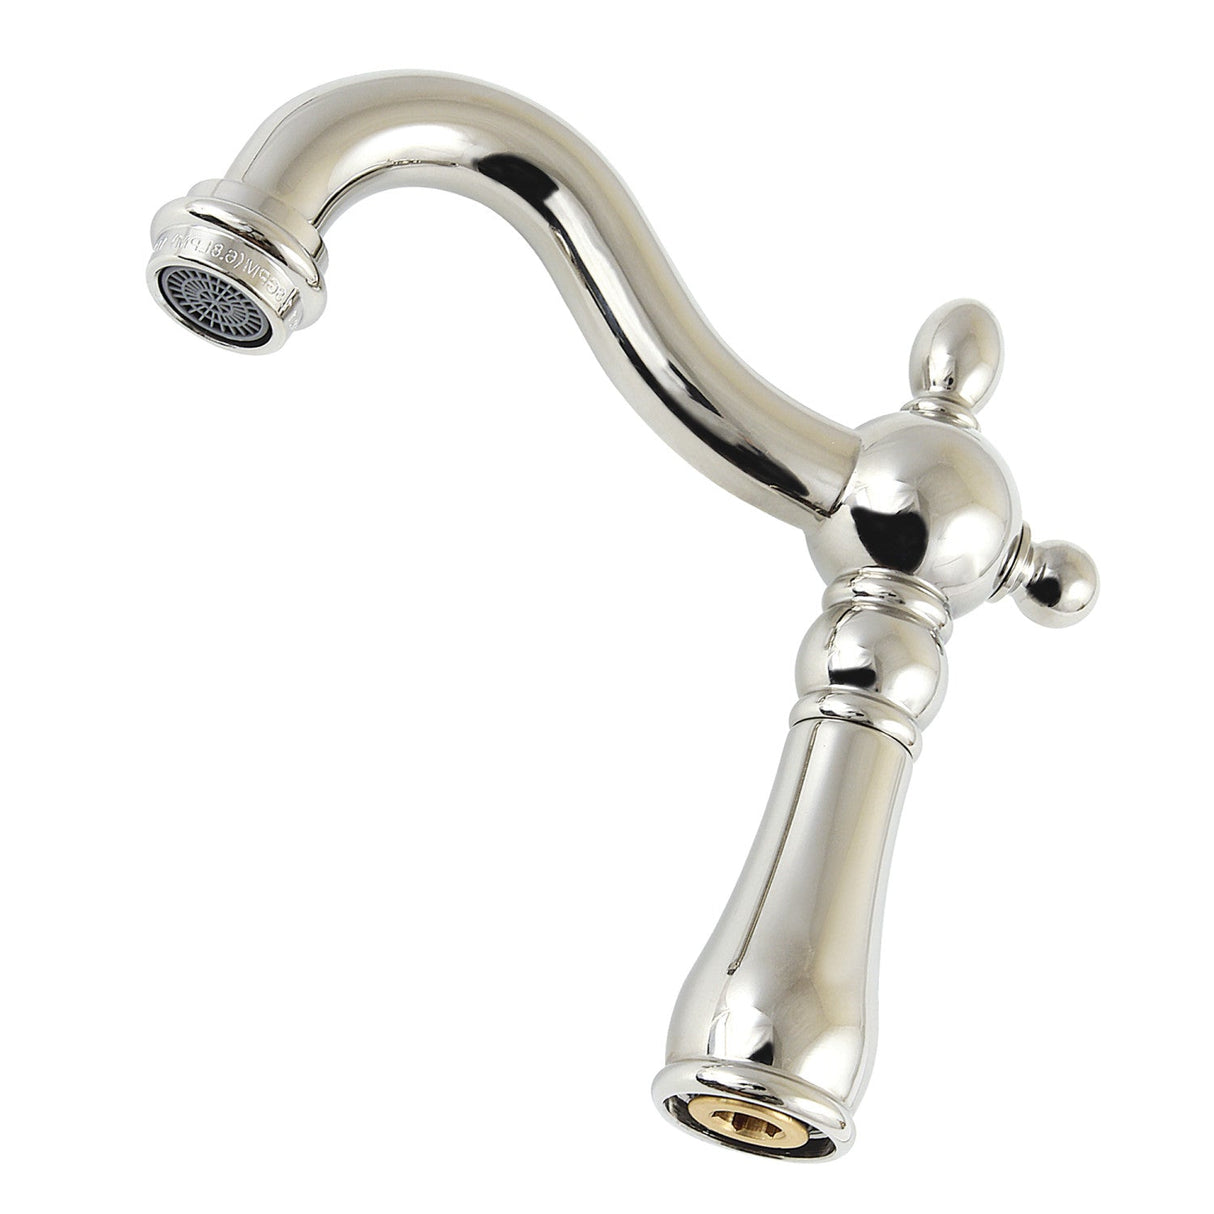 Heritage KSP2446 1.8 GPM Brass Faucet Spout, Polished Nickel